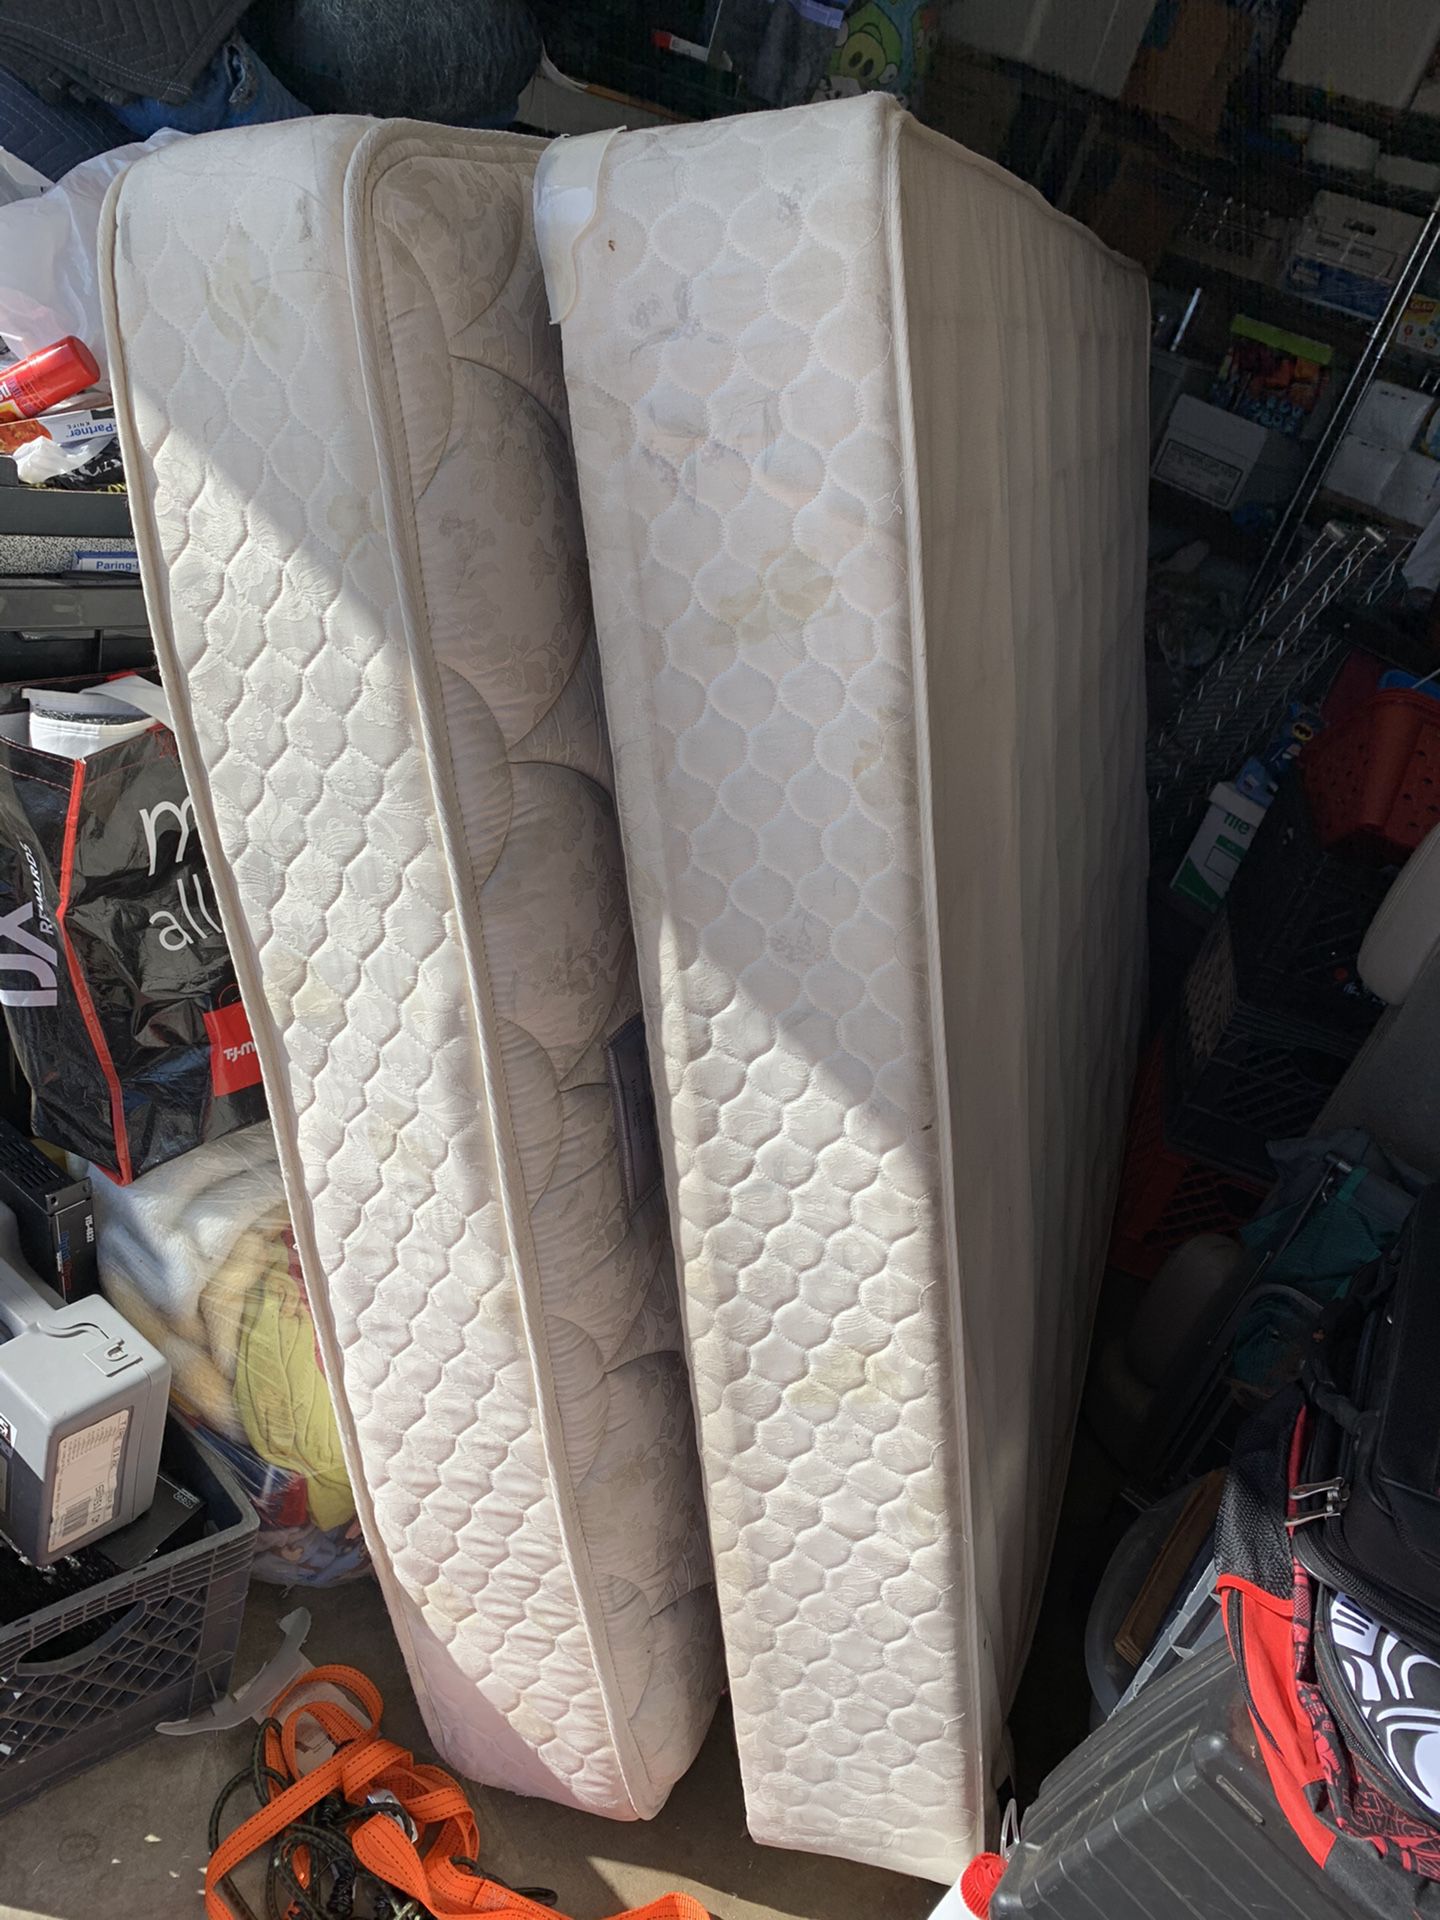 Used Sealy Queen Mattress & Boxspring-looking for best Offer